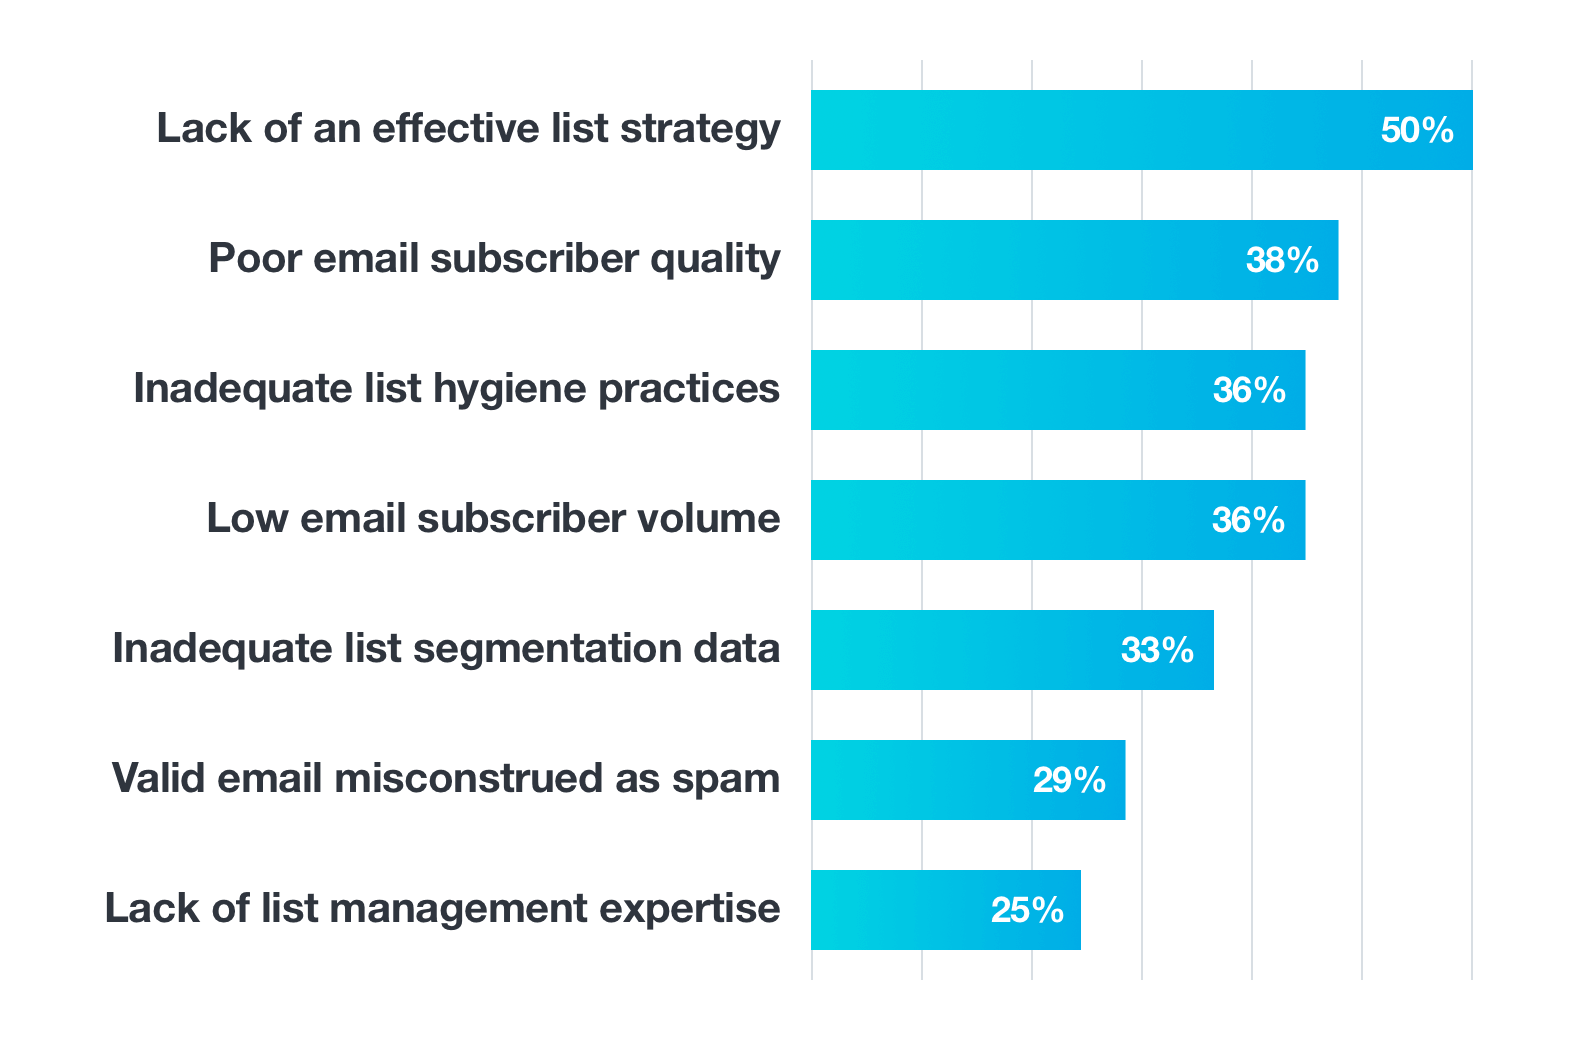 Email marketers need to focus on things such as having an effective list strategy, subscriber quality, and even adequate list hygiene practices. 